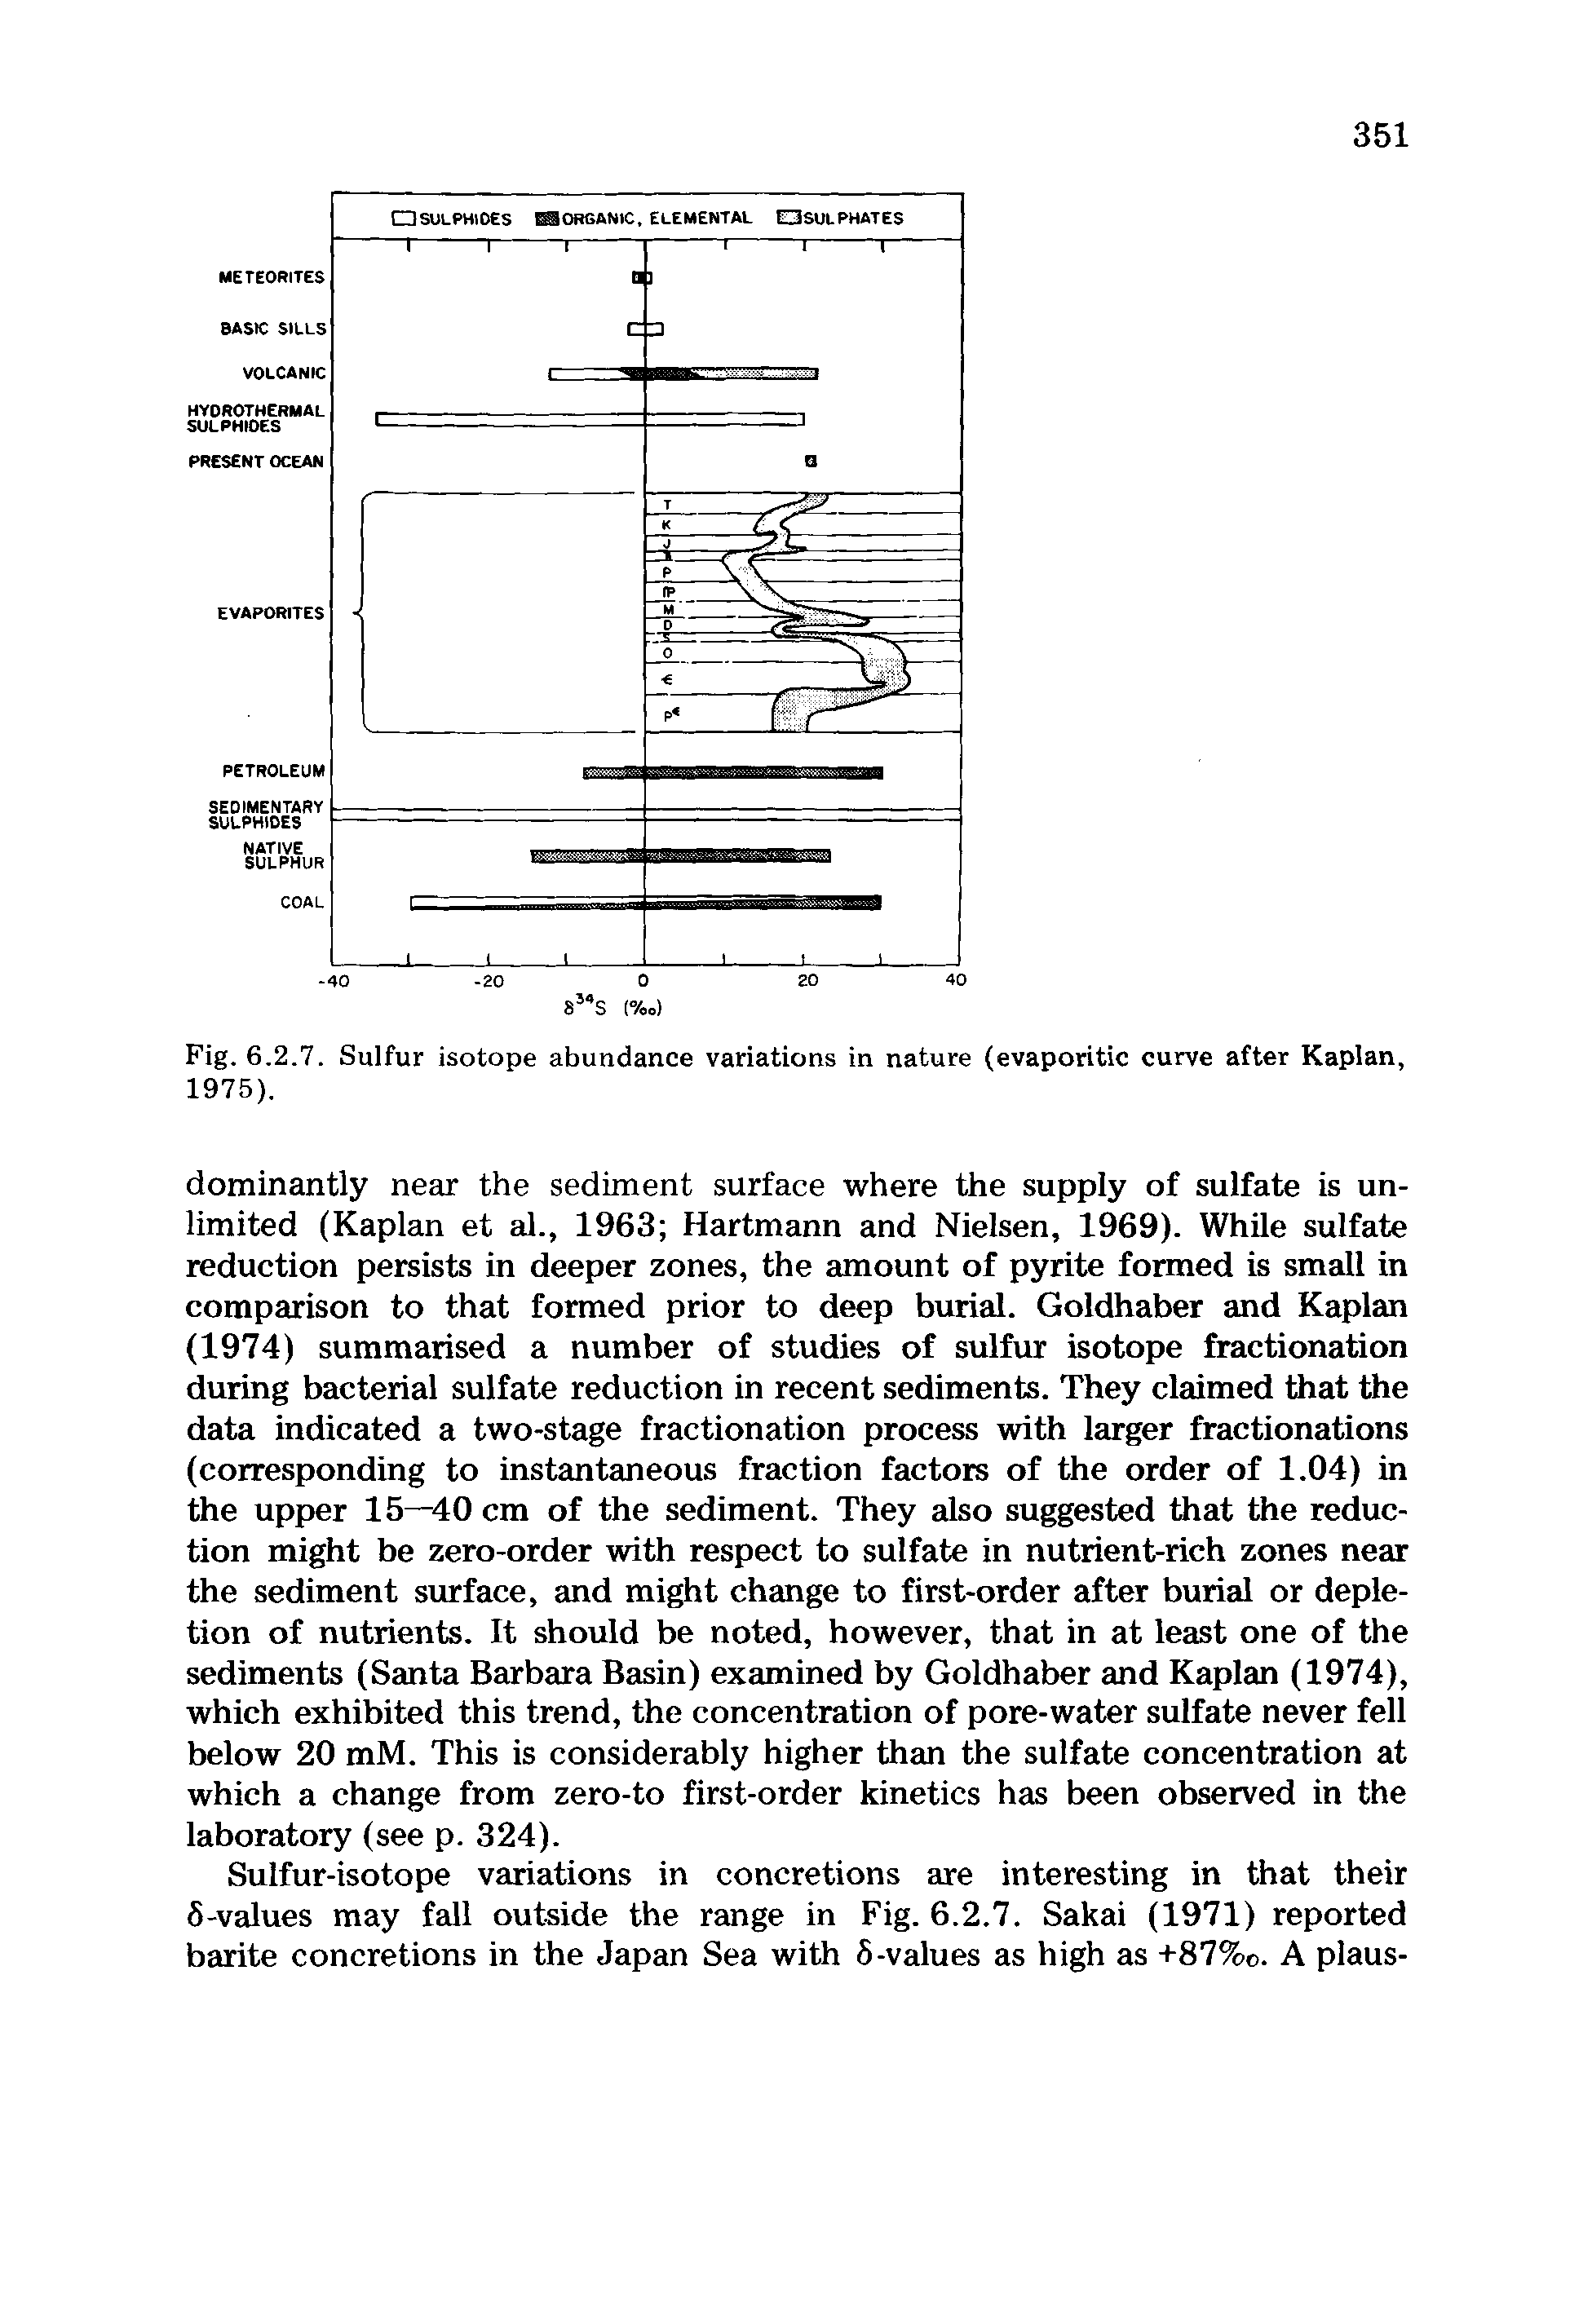 Fig. 6.2.7. Sulfur isotope abundance variations in nature (evaporitic curve after Kaplan, 1975).